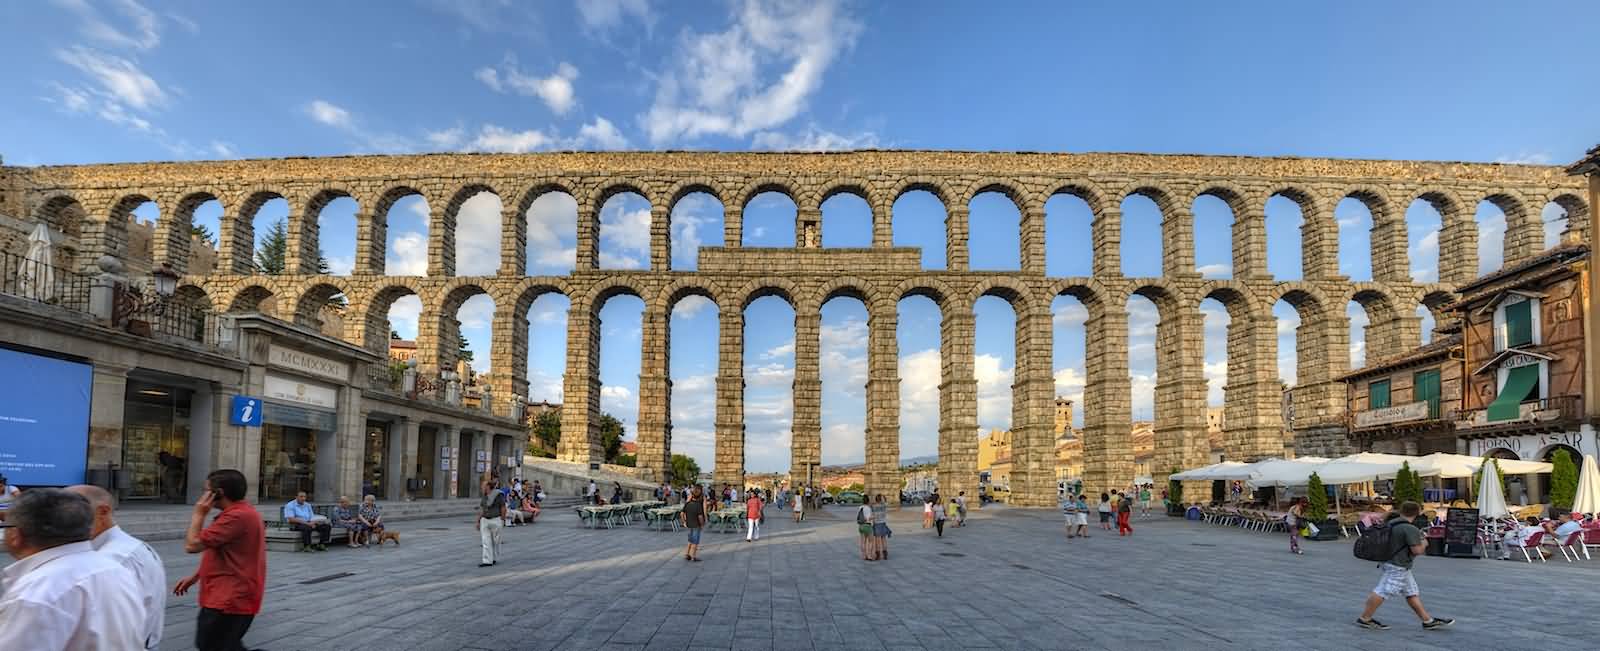 50 Most Beautiful Pictures Of The Aqueduct Of Segovia In Spain